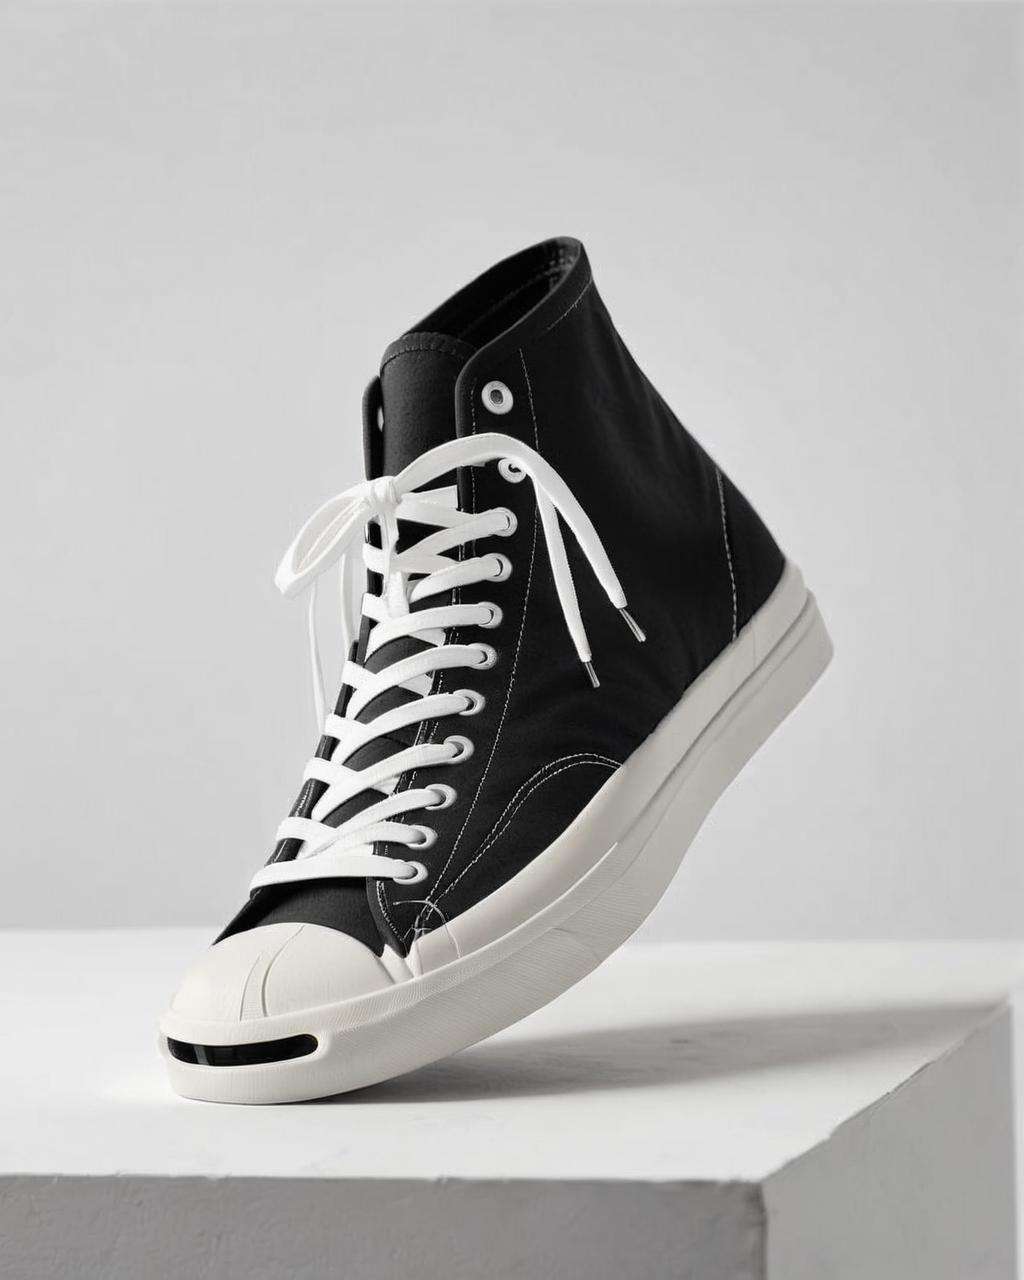 Converse Jack Purcell sneakers, understated sophistication:0.6, photographed in a black and white portrait style, highlighting their rubber toe cap and subtle branding, capturing their effortless elegance, lifestyle shot:0.8.<lora:shoes:1.0>